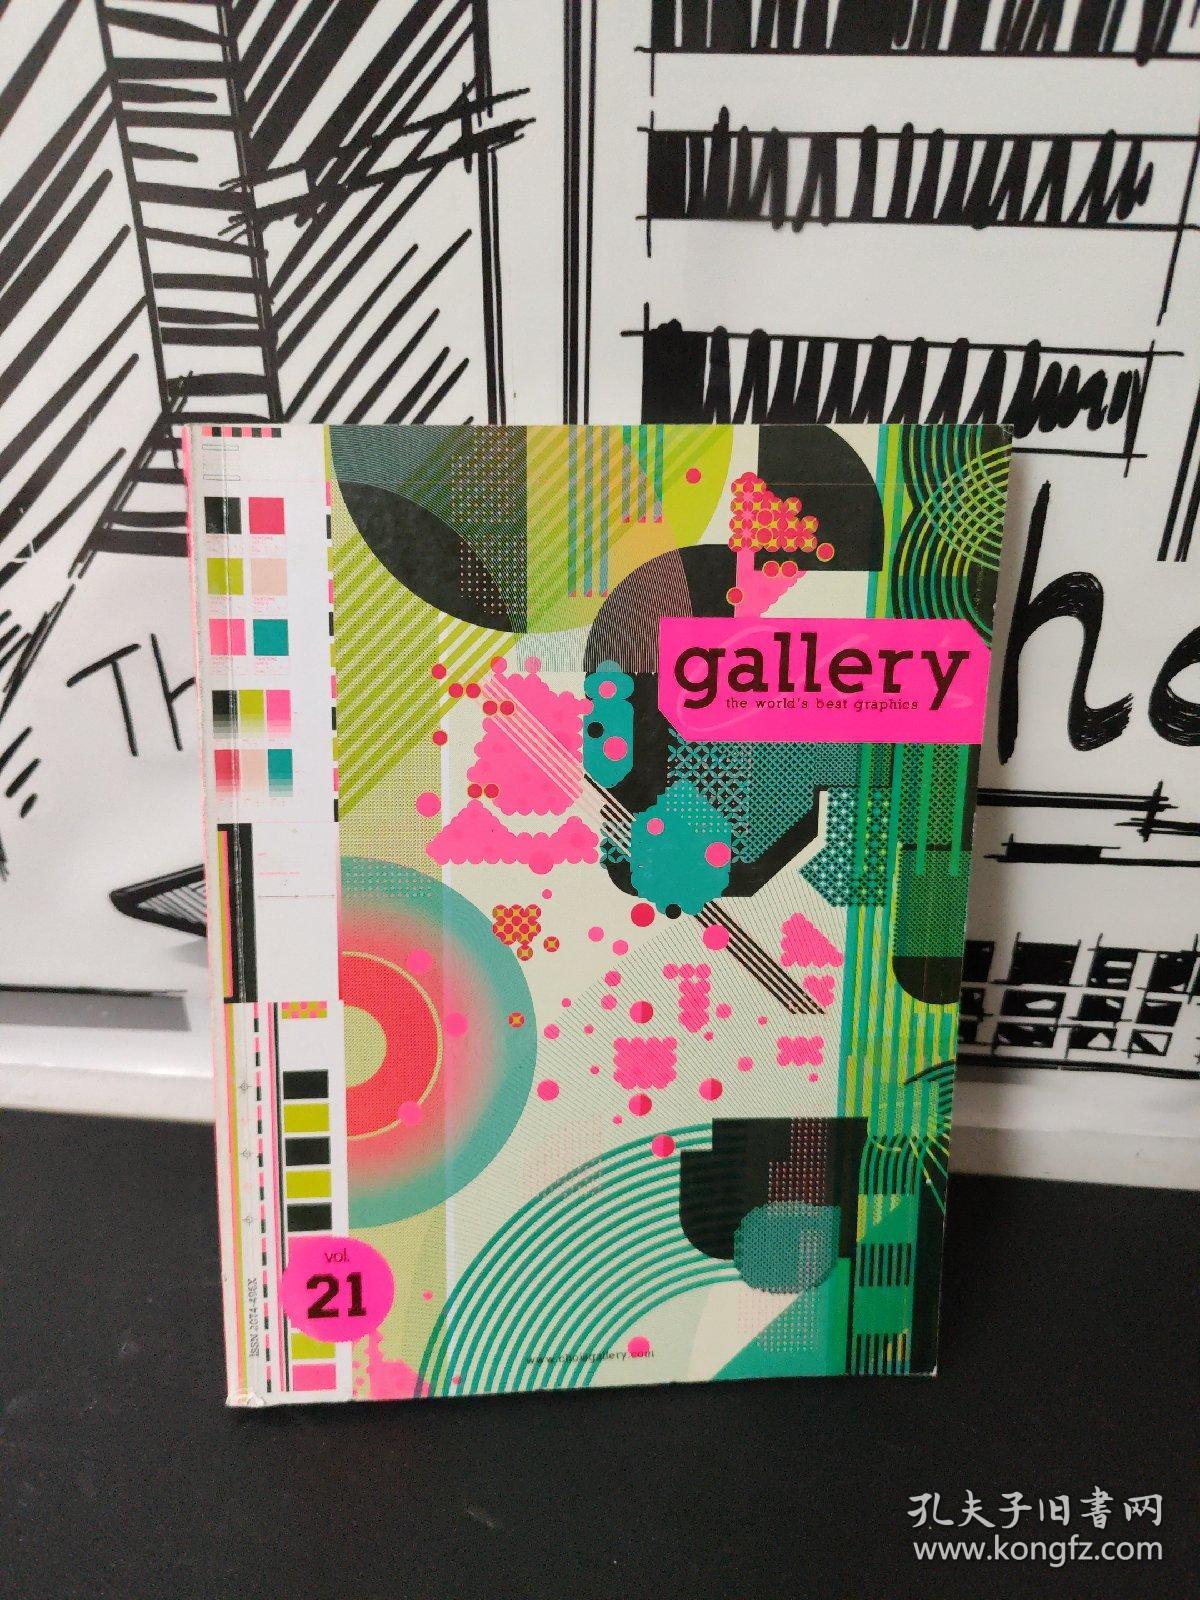 Gallery the world's best graphics vol. 21